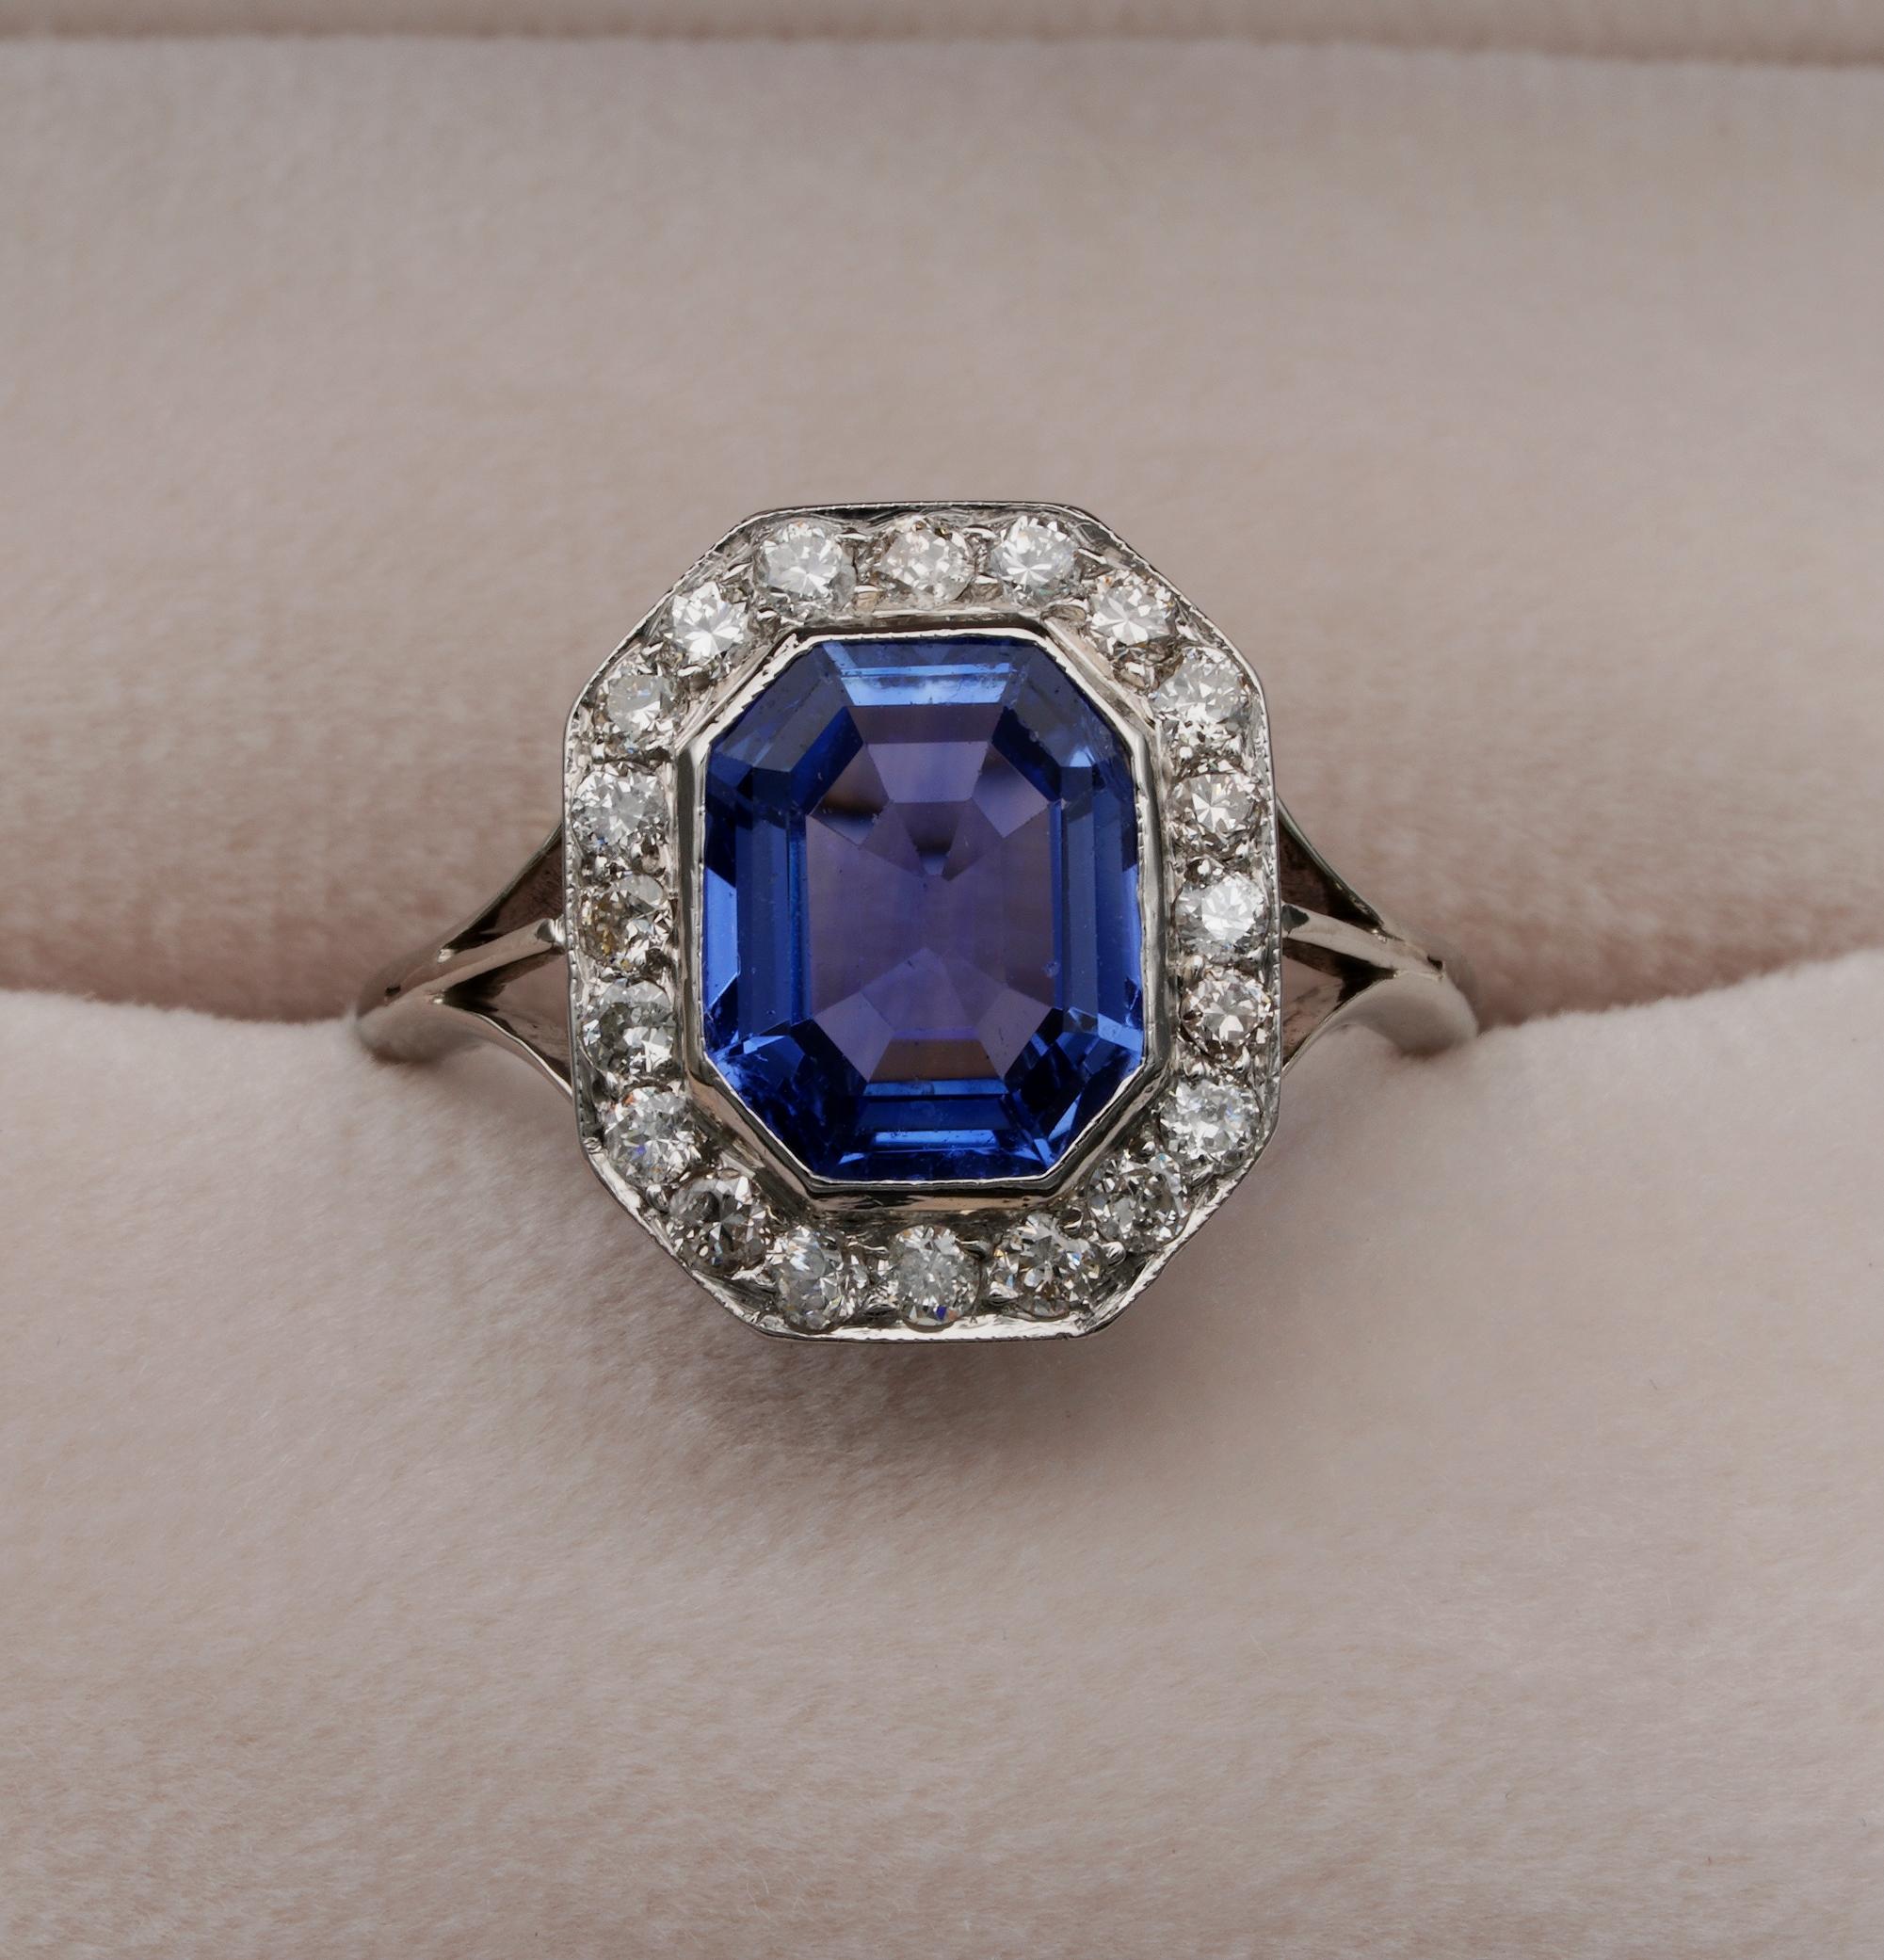 In The Myth

Magnificent example of genuine Edwardian Diamond & Sapphire engagement ring 1900 ca
A gorgeous, velvety cornflower blue beautiful octagonal cut sapphire, weighing 2.70 carats with a wider spread, glistens and glows between a frame a of